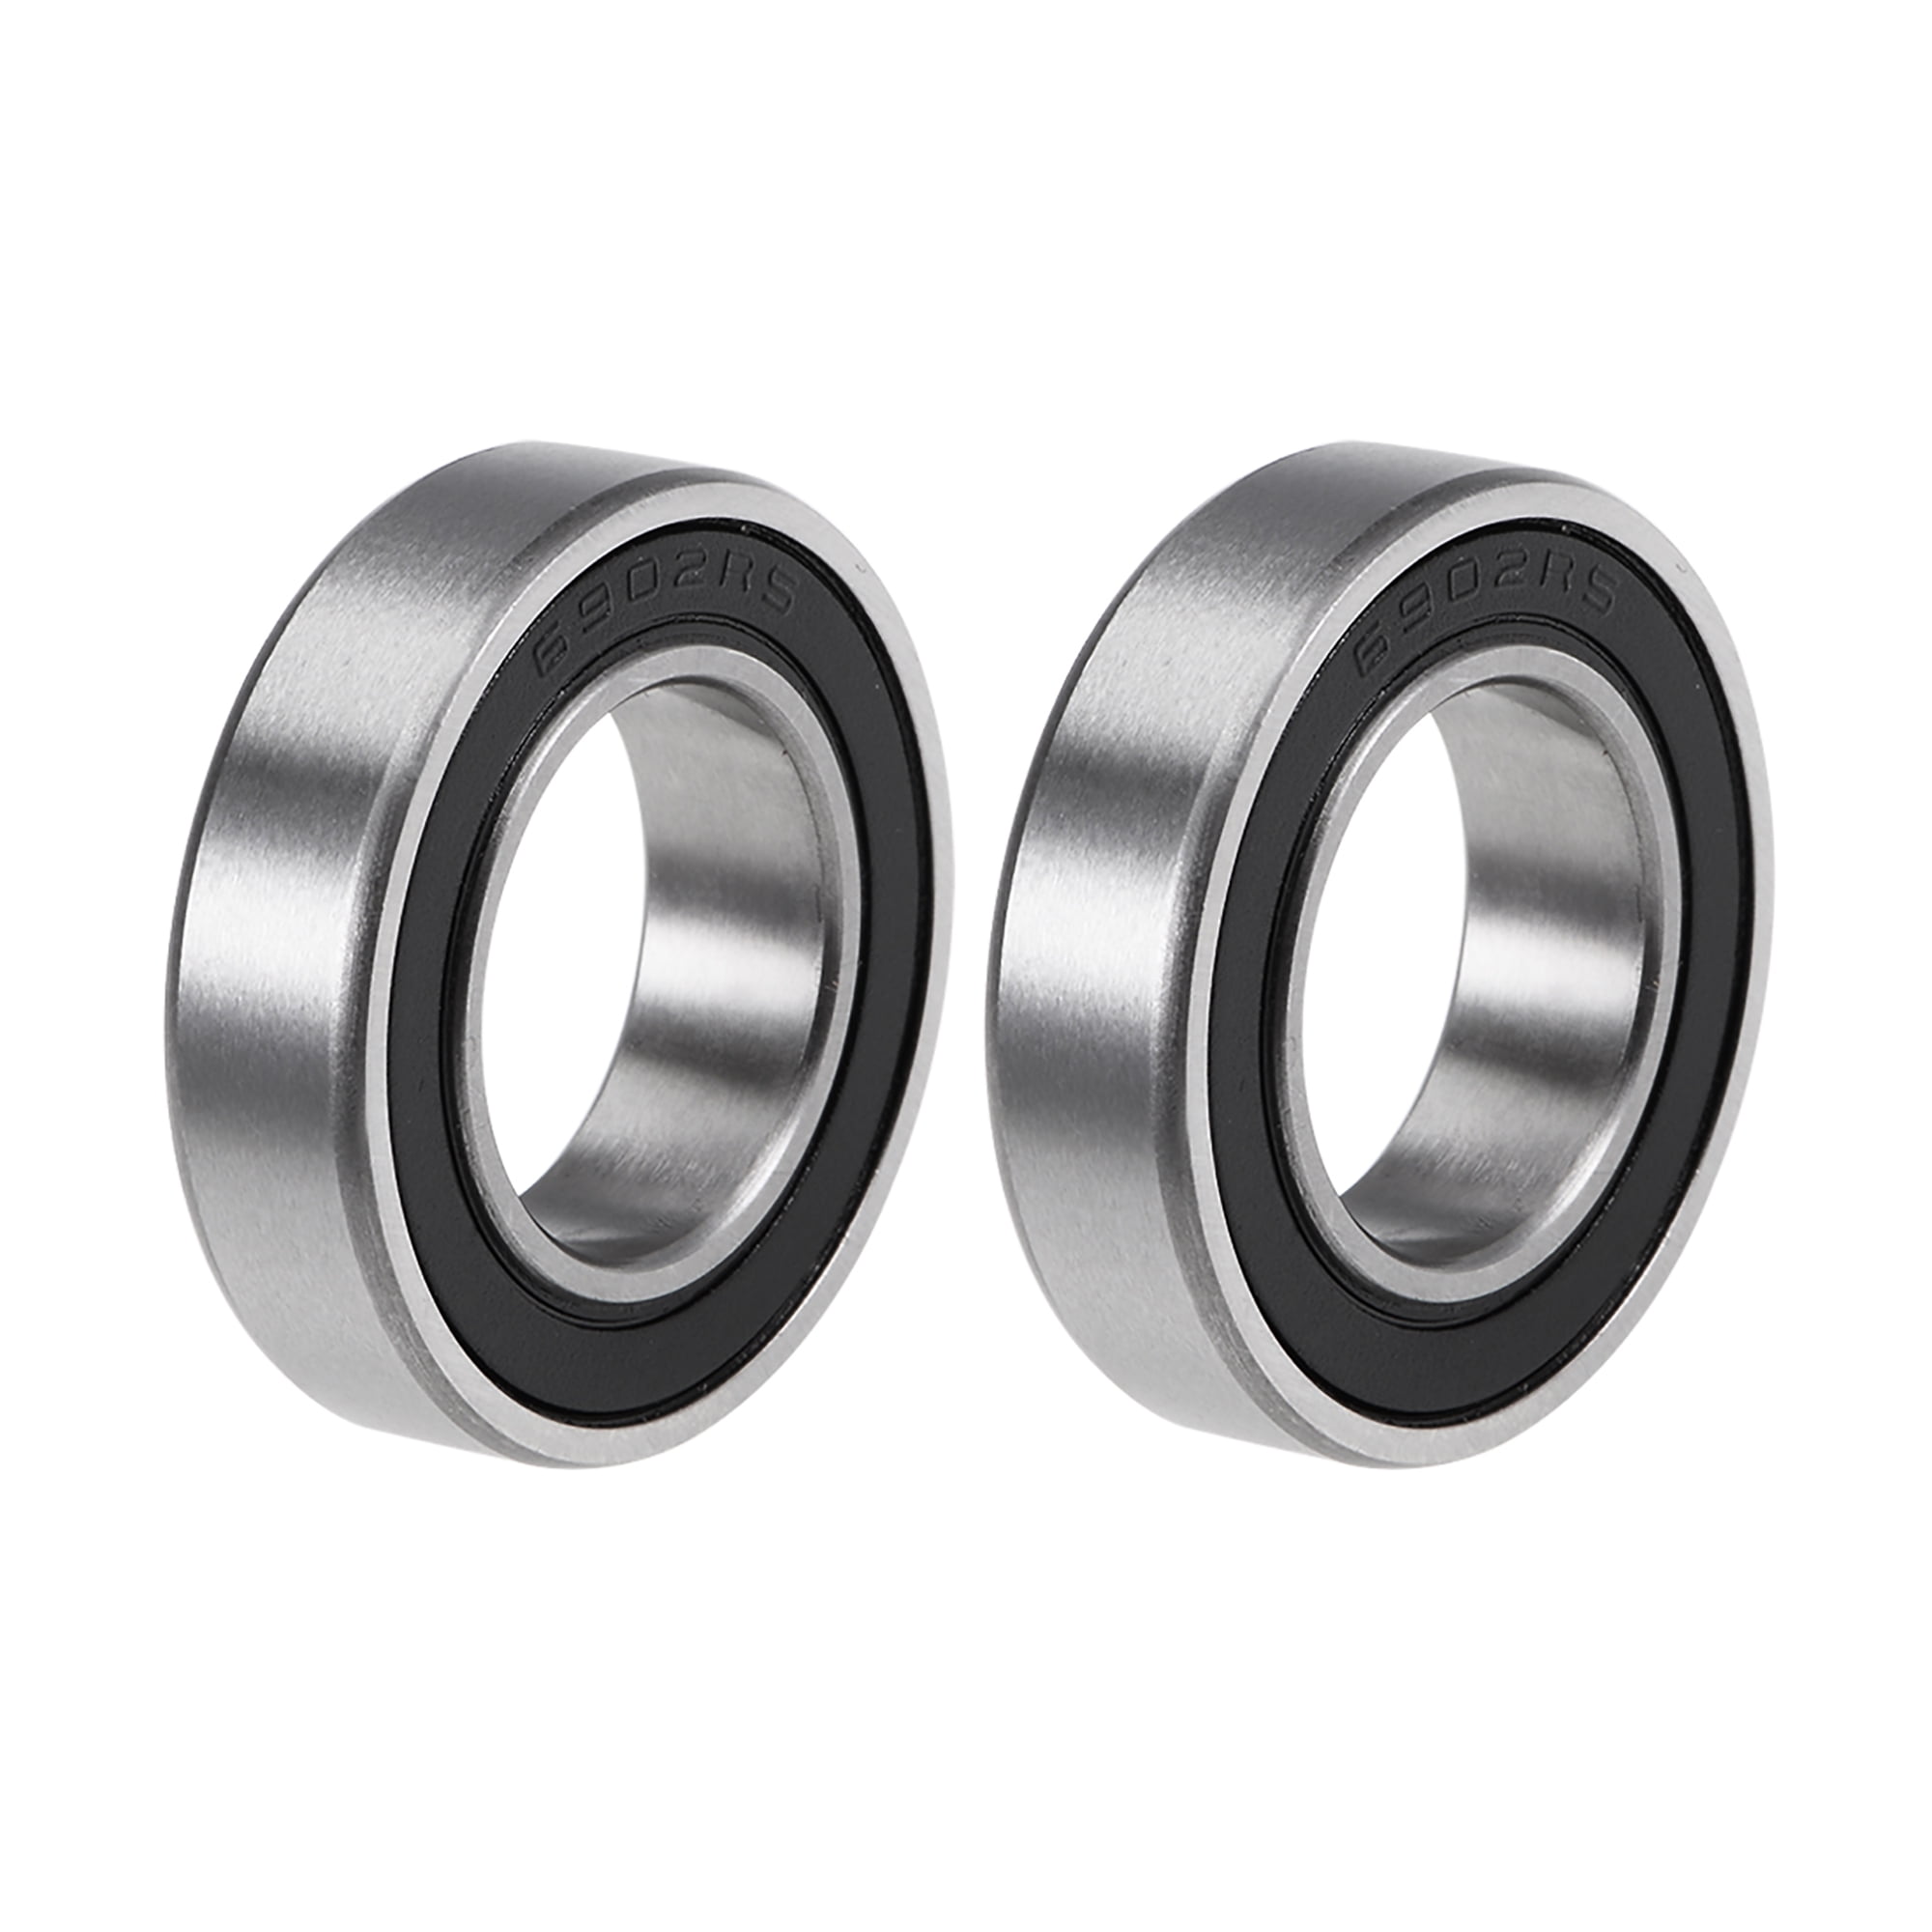 2 x 16287-2RS CYCLE HUB BEARING RUBBER SEALED ID 16mm OD 28mm WIDTH 7mm 